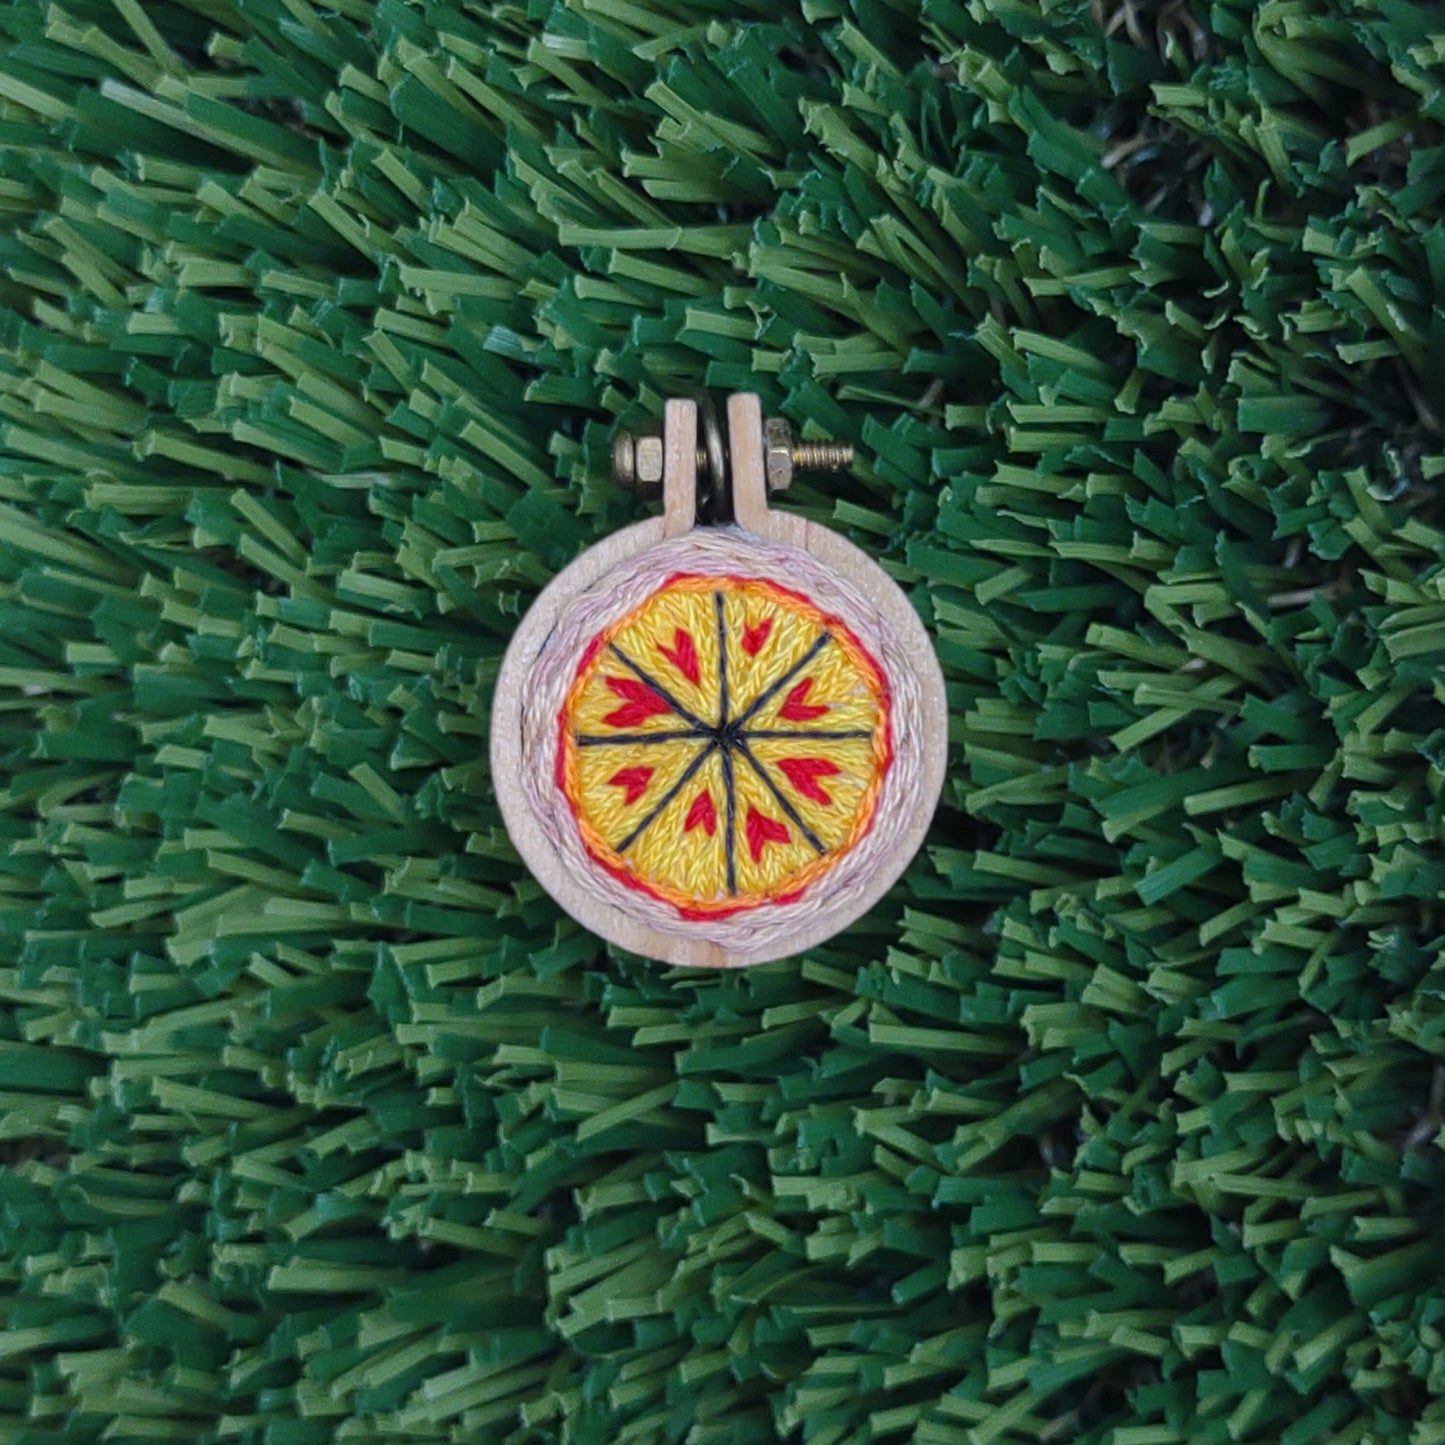 Handmade Embroidered Pizza Pendant for Necklace or Keychain